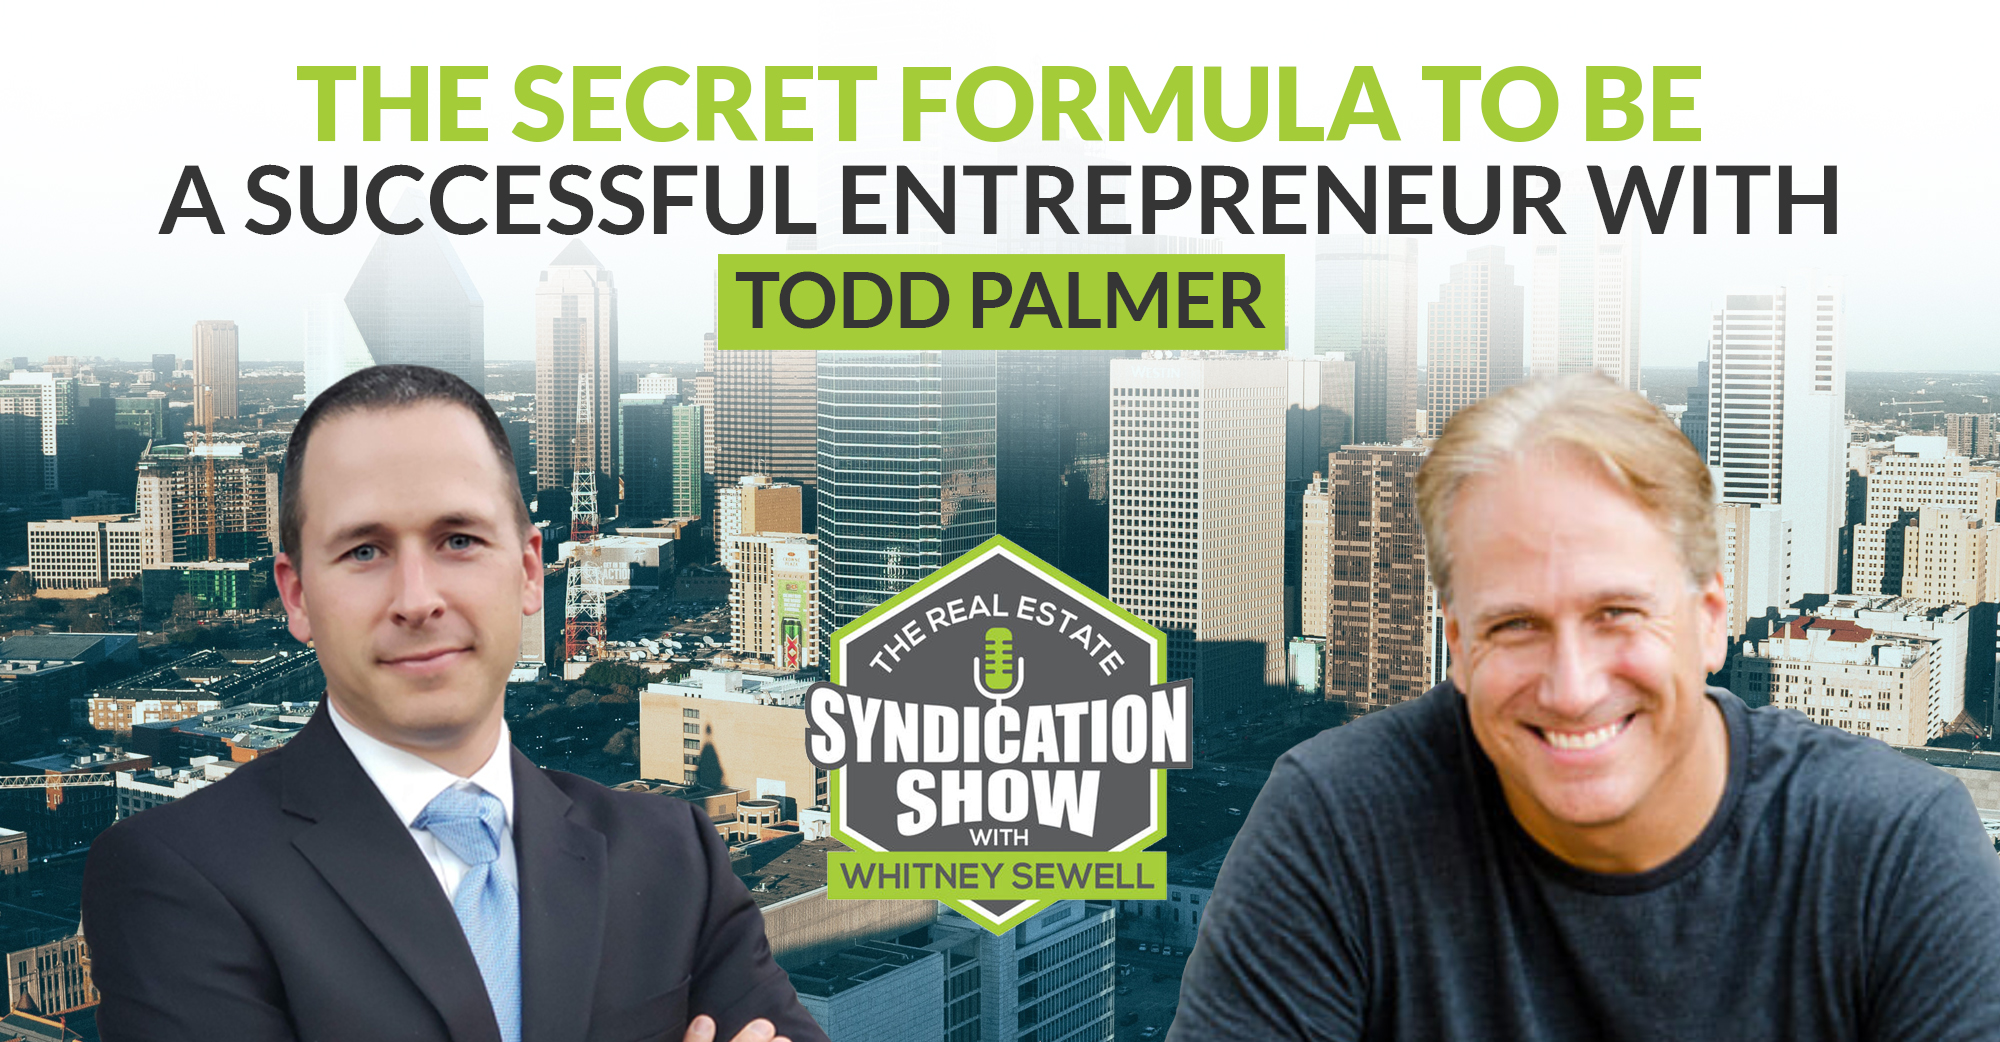 The Secret Formula To Be A Successful Entrepreneur with Todd Palmer